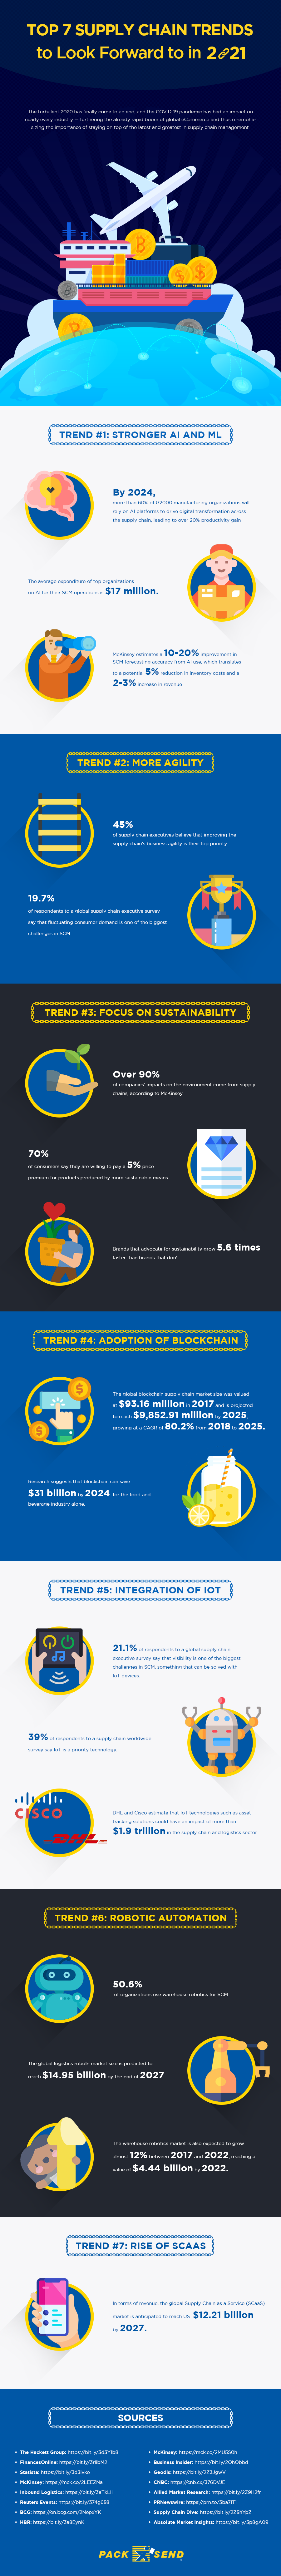 supply-chain-trends-infographic-packsend